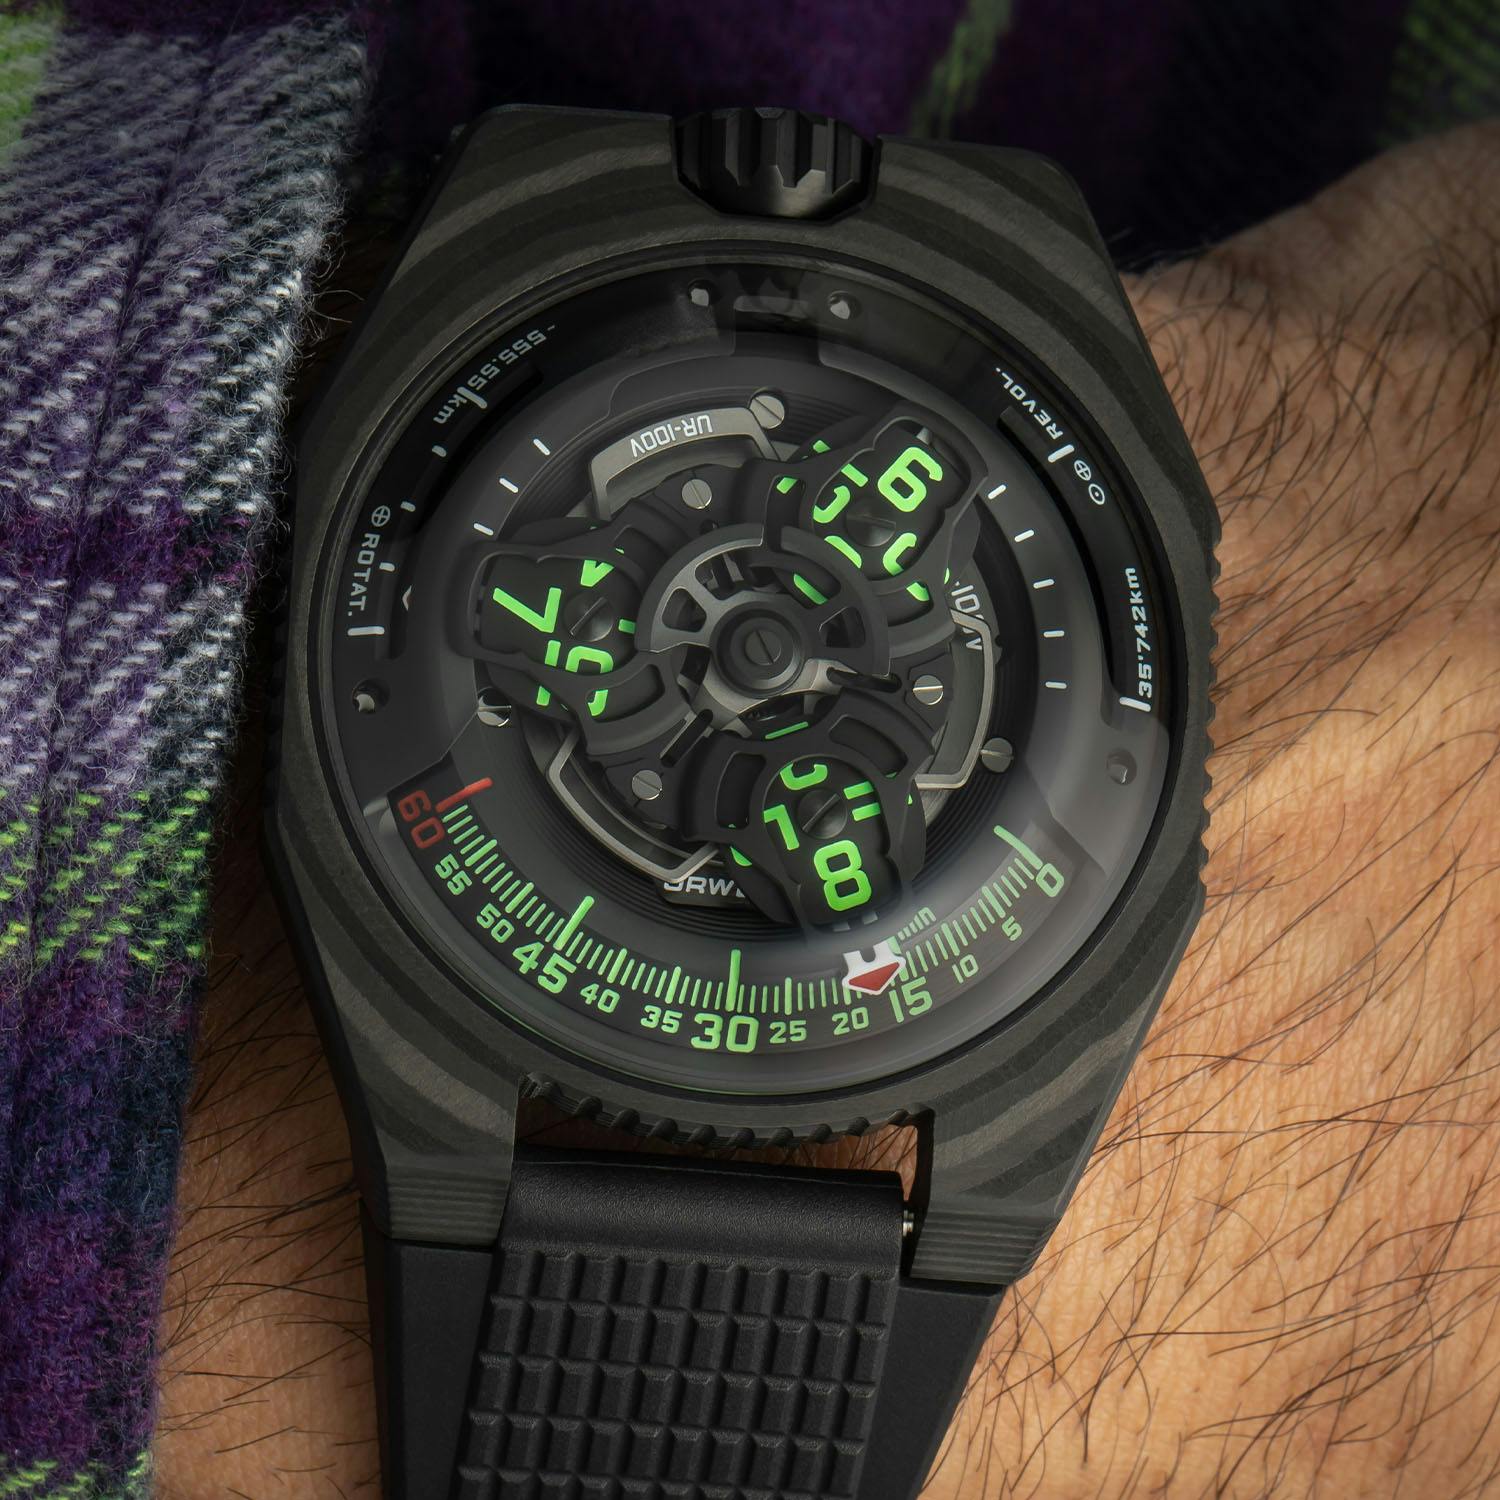 Urwerk Carbon Fibre Space Traveler. Very unusual mechanism, time display and a Carbon Fibre case. Image courtesy: monochrome-watches.com